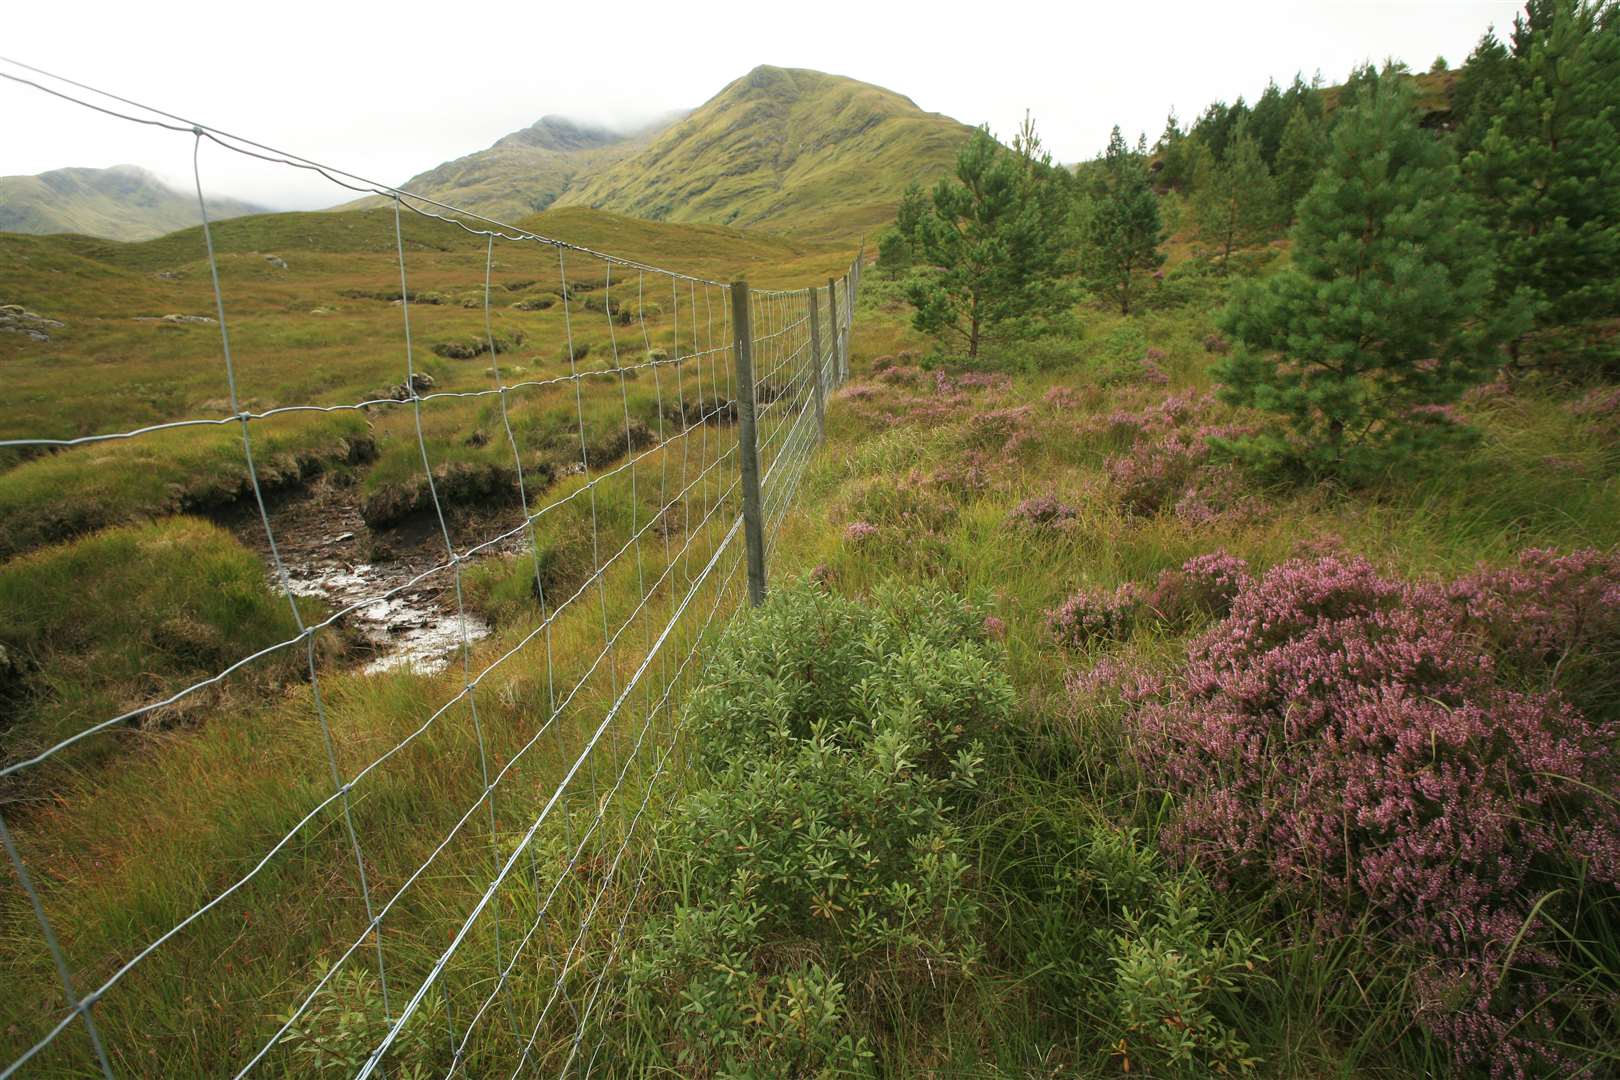 Scots pines, bog myrtle and heather in bloom at Athnamulloch.